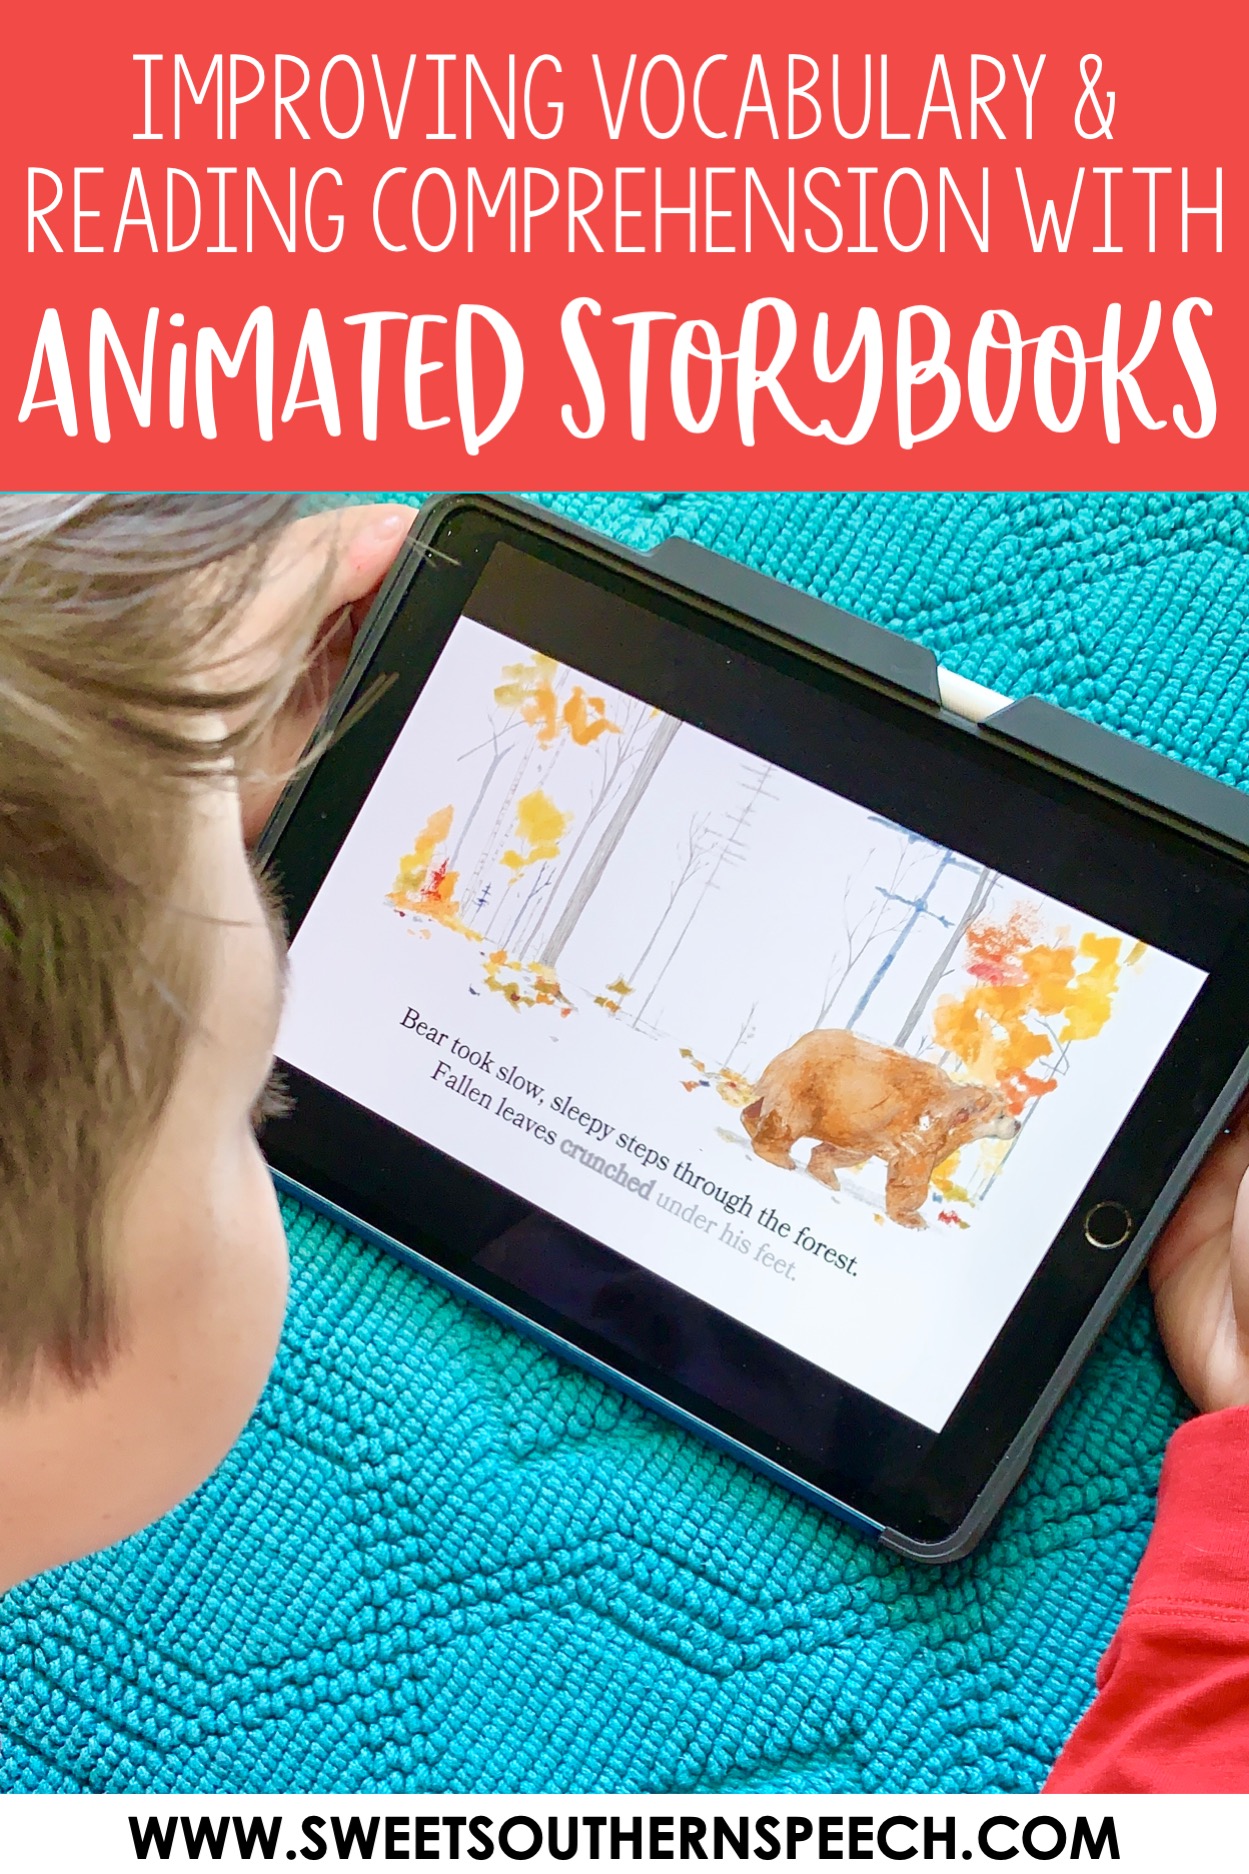 Using animated sotrybooks to improve vocabulary and comprehension